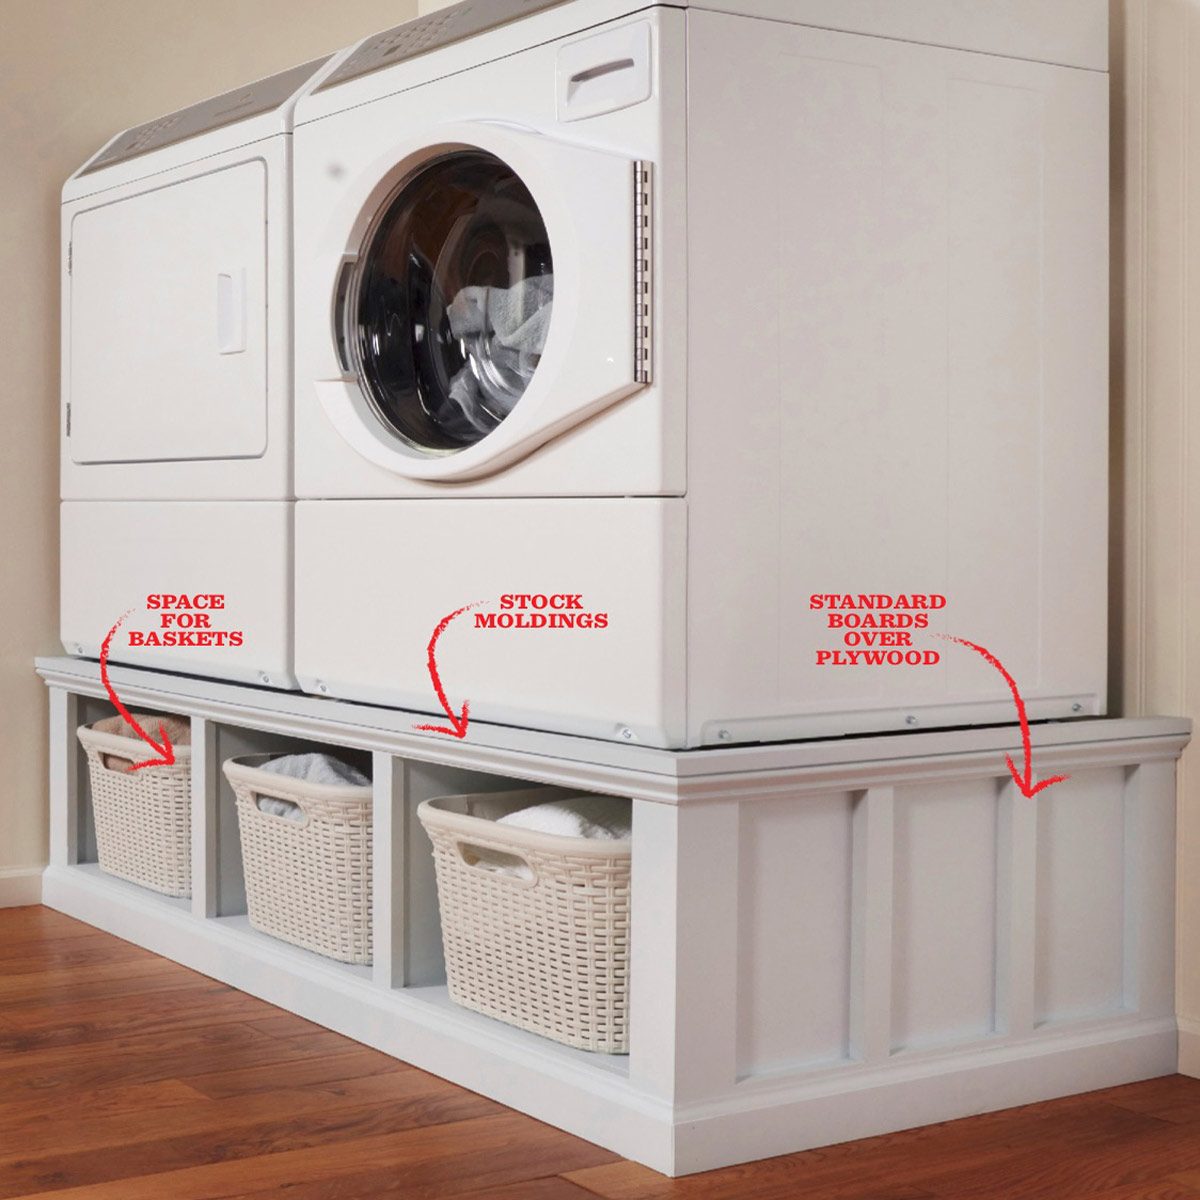 DIY Cleaning Recipes - Laundry Room